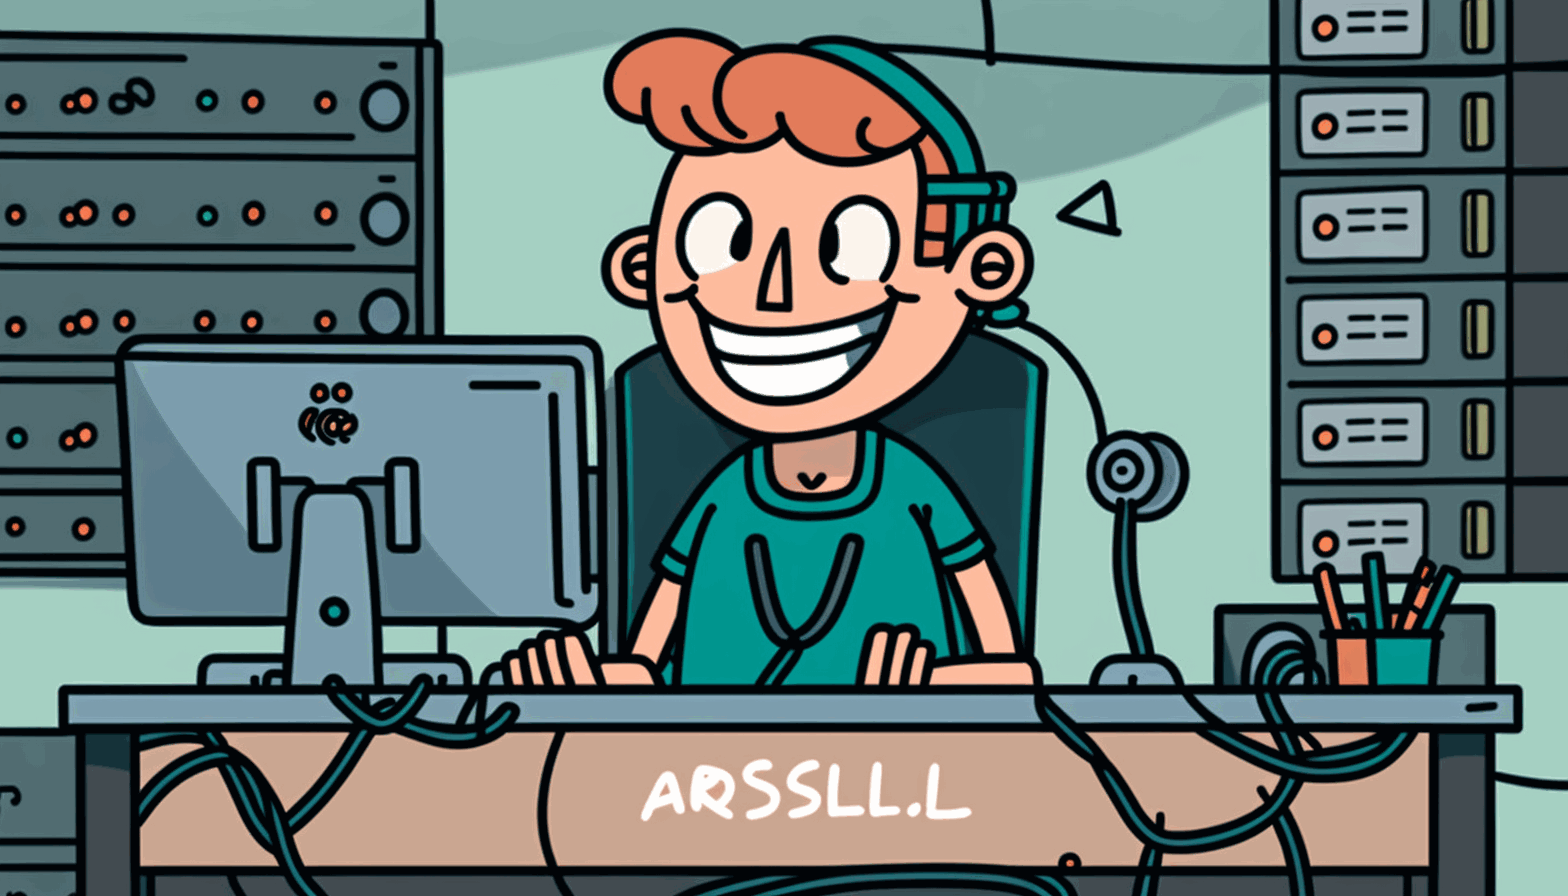 A cartoon character sitting at a desk, surrounded by servers and cables, with Ansible's logo on the computer screen, smiling as tasks are automated.